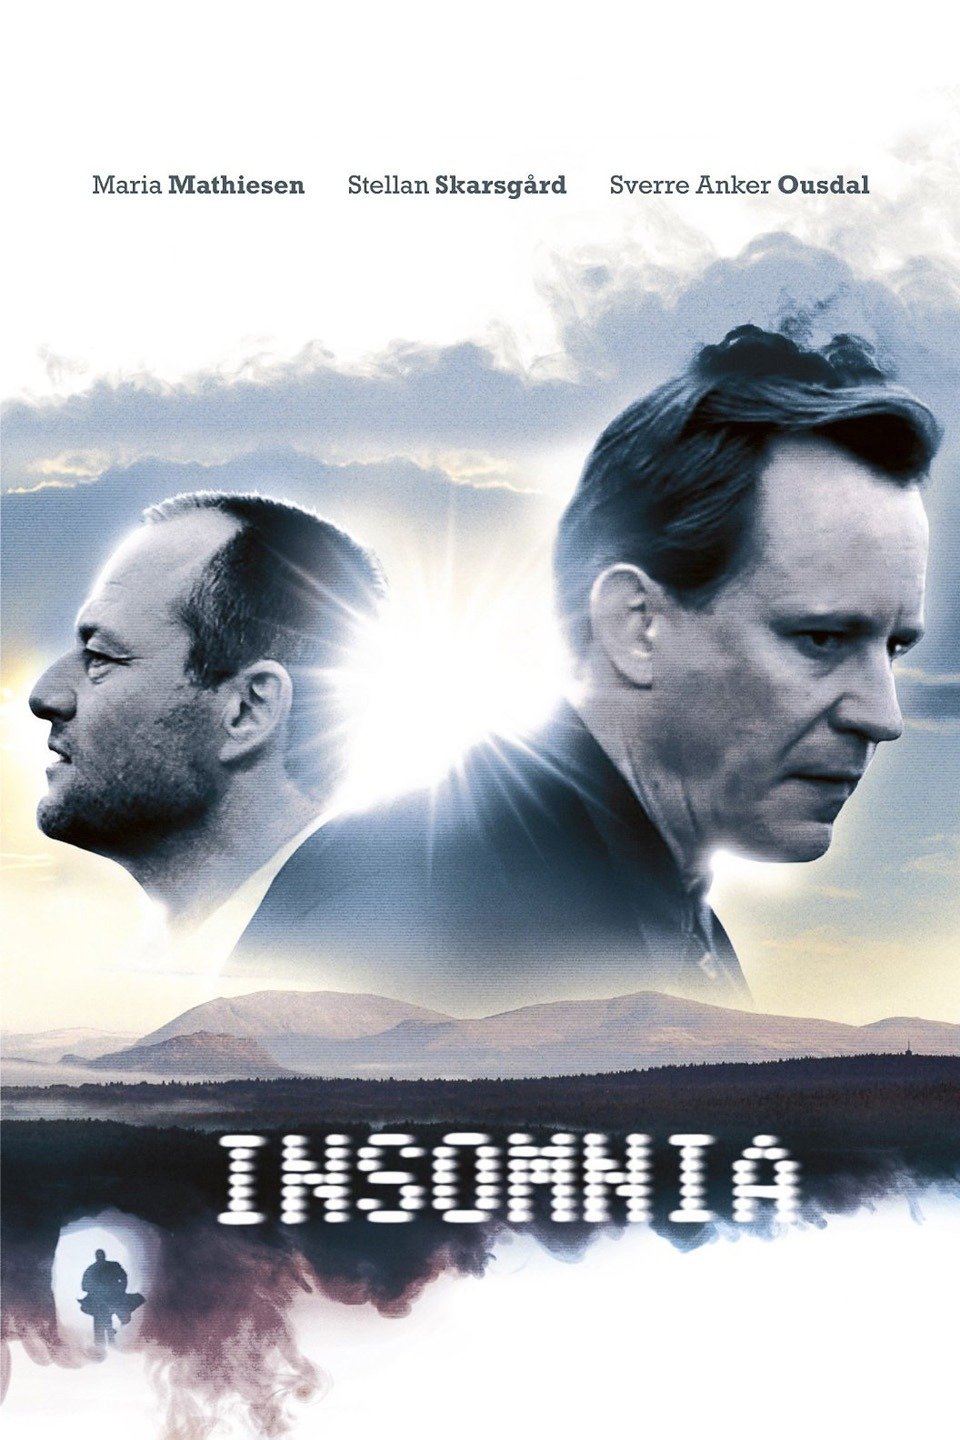 insomnia film characters